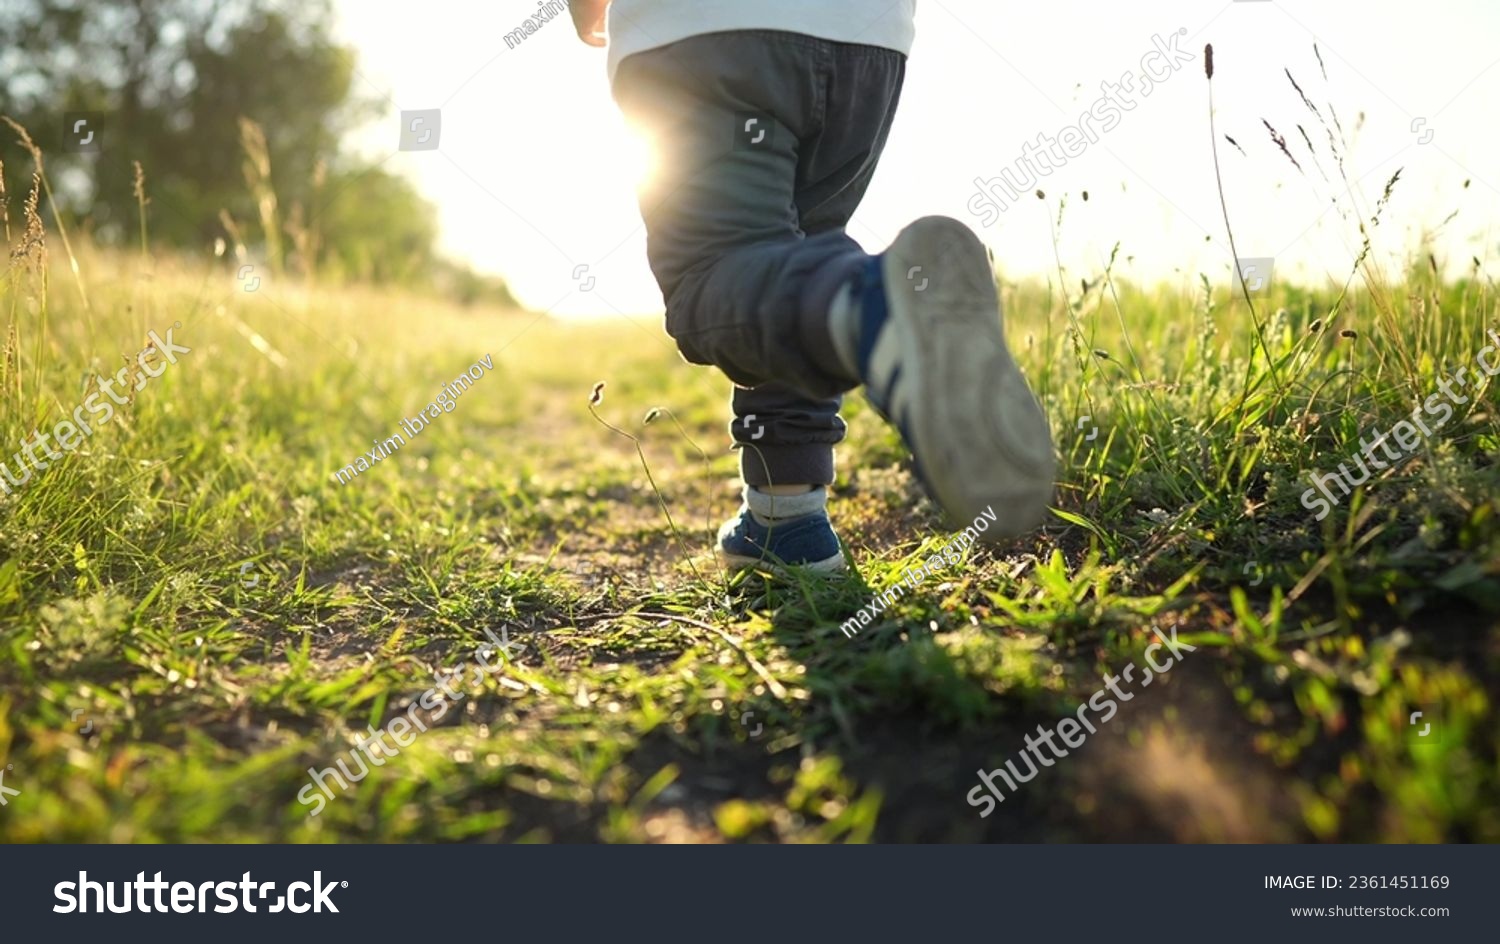 kid run legs close-up in park at sunset. happy family. people in the park concept boy son joyful run. happy family summer. little baby run child fun summer kid lifestyle dream concept #2361451169